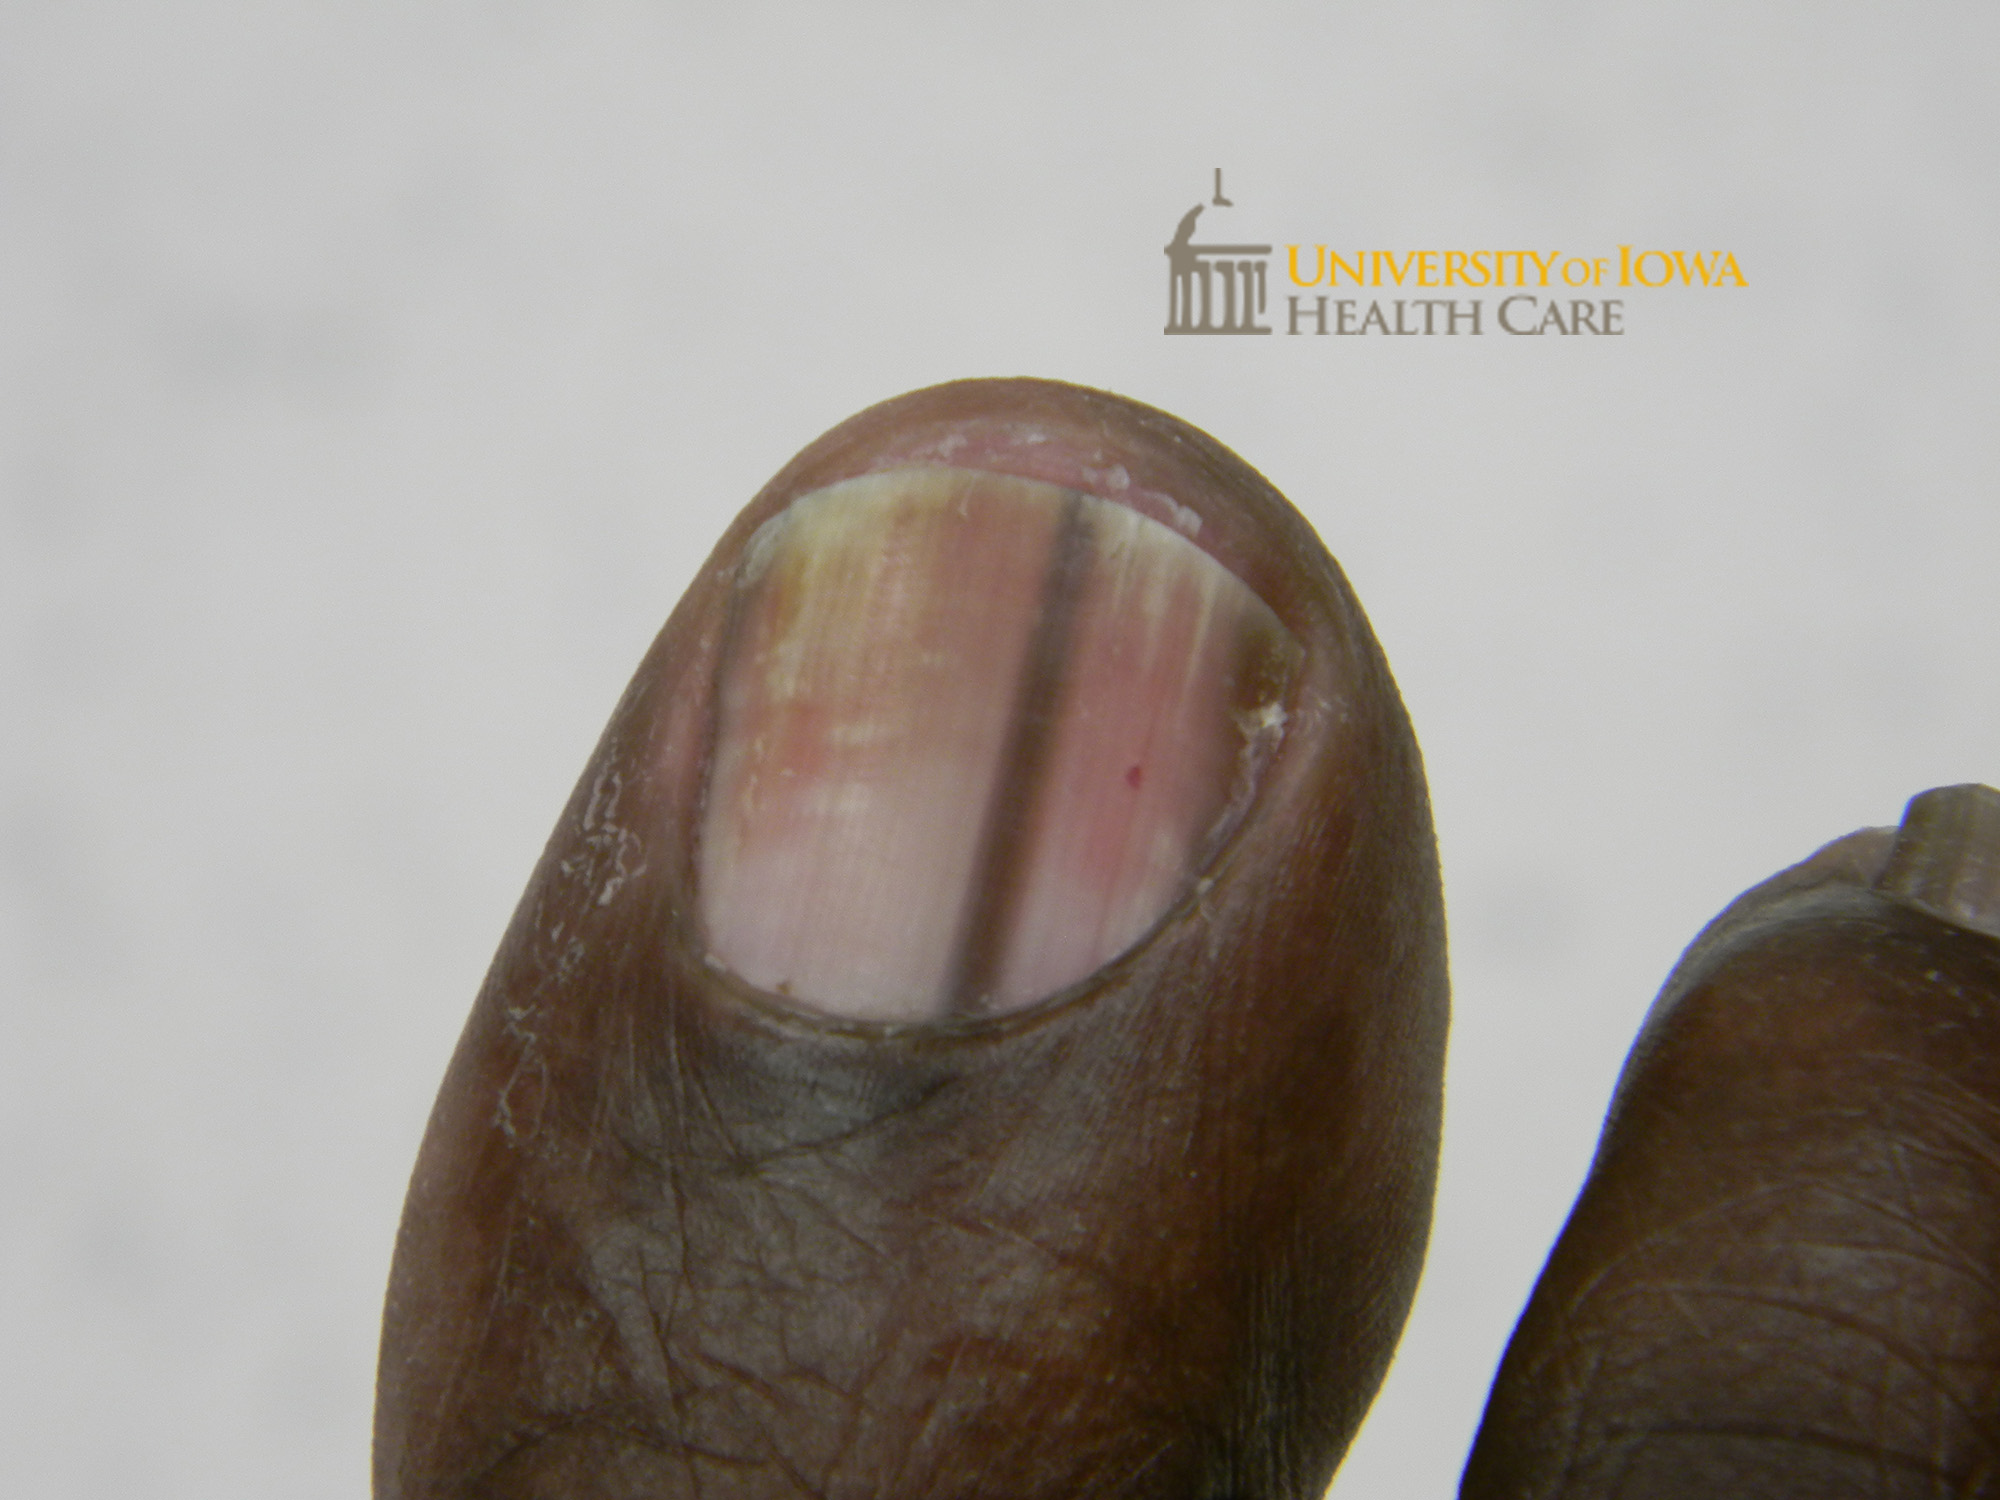 Longitudinal brown band on the toenail. (click images for higher resolution).